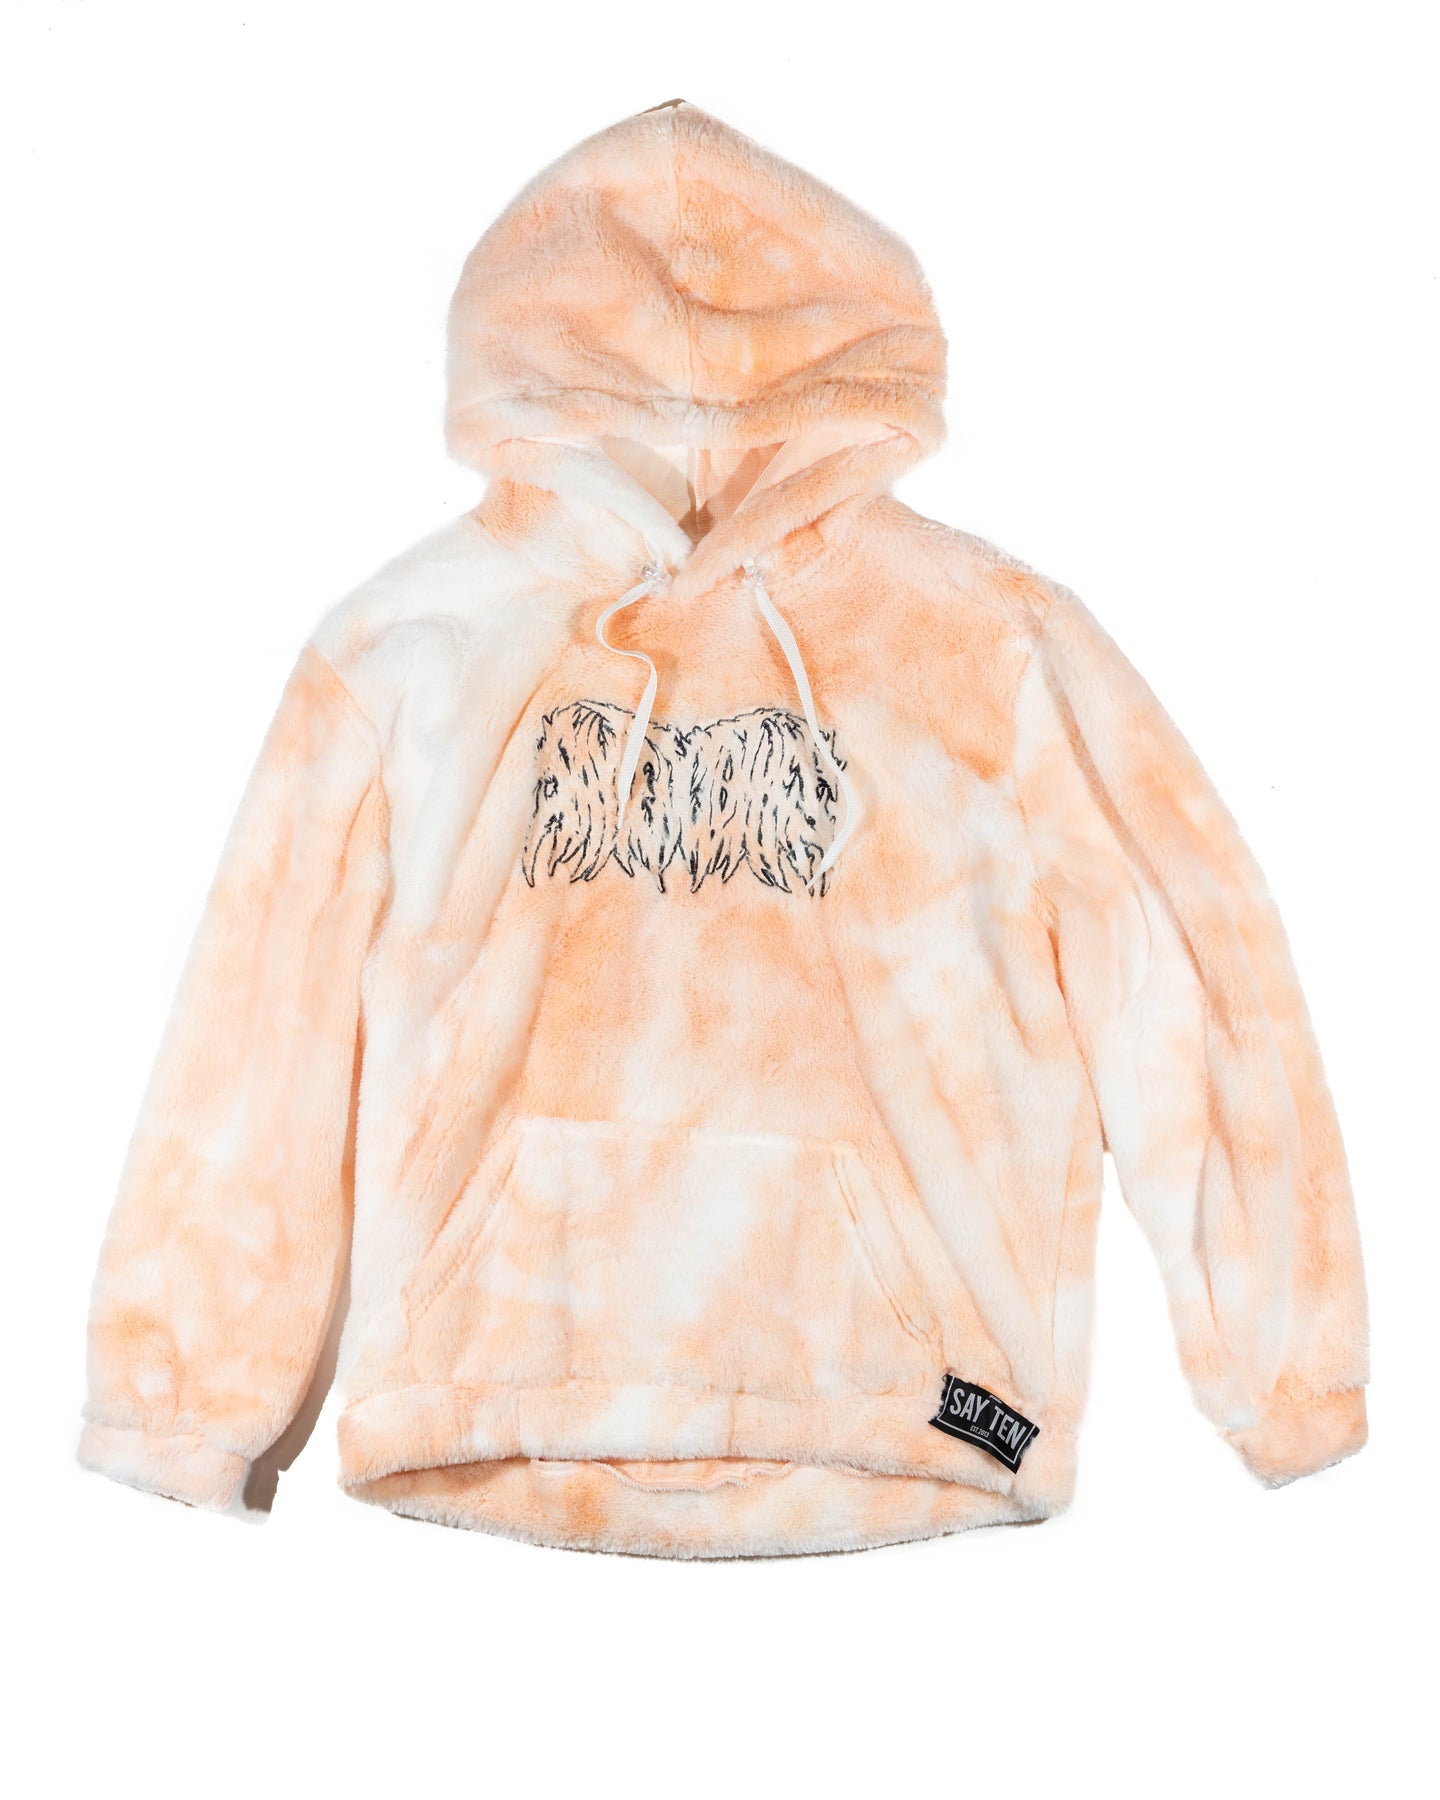 One off peach cream puffy hoodie. Embroidered logo.